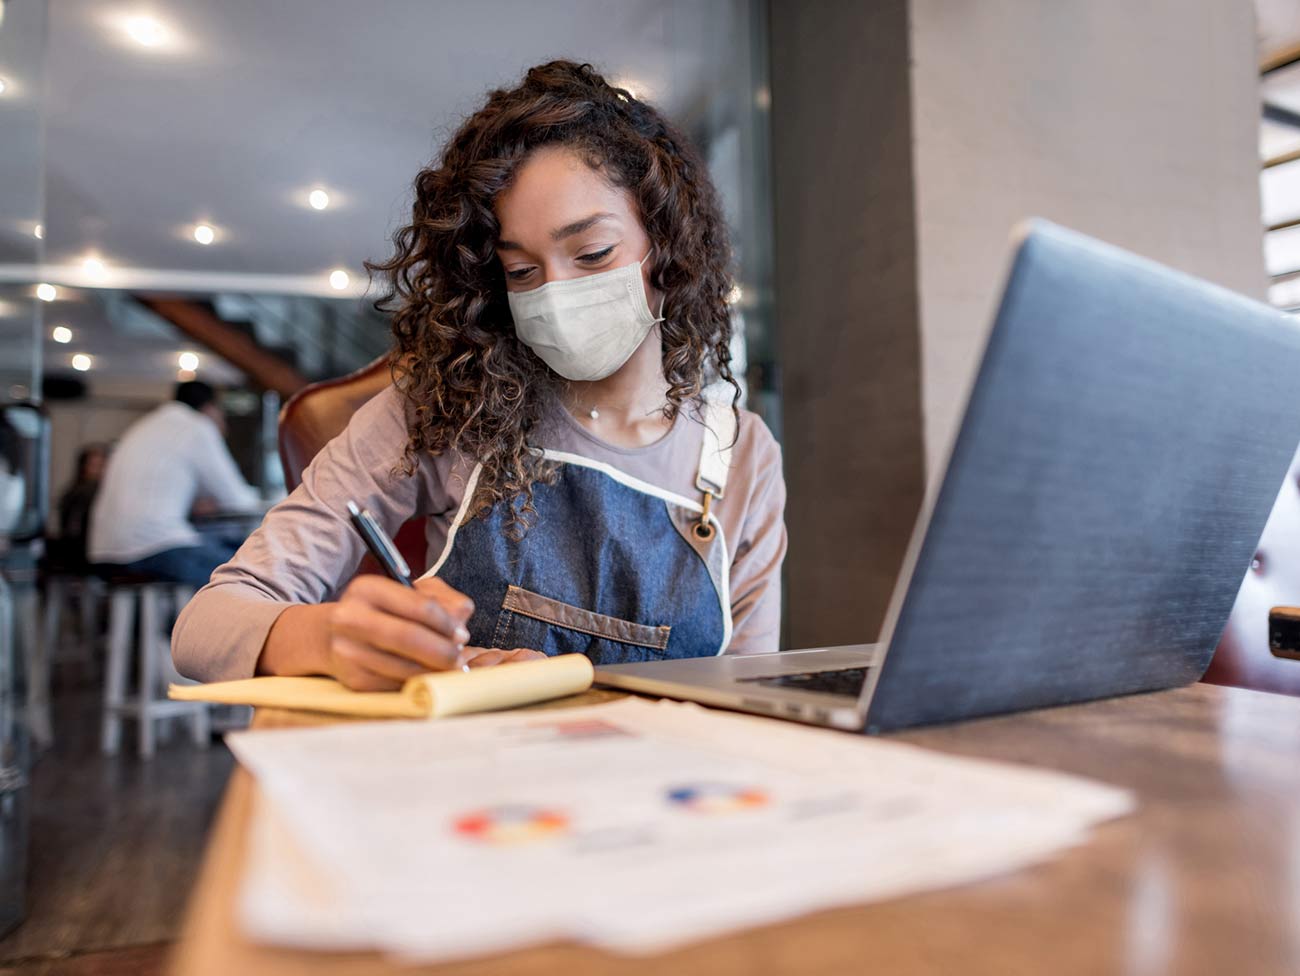 Woman wearing face mask writing in a notepad next to an open laptop.